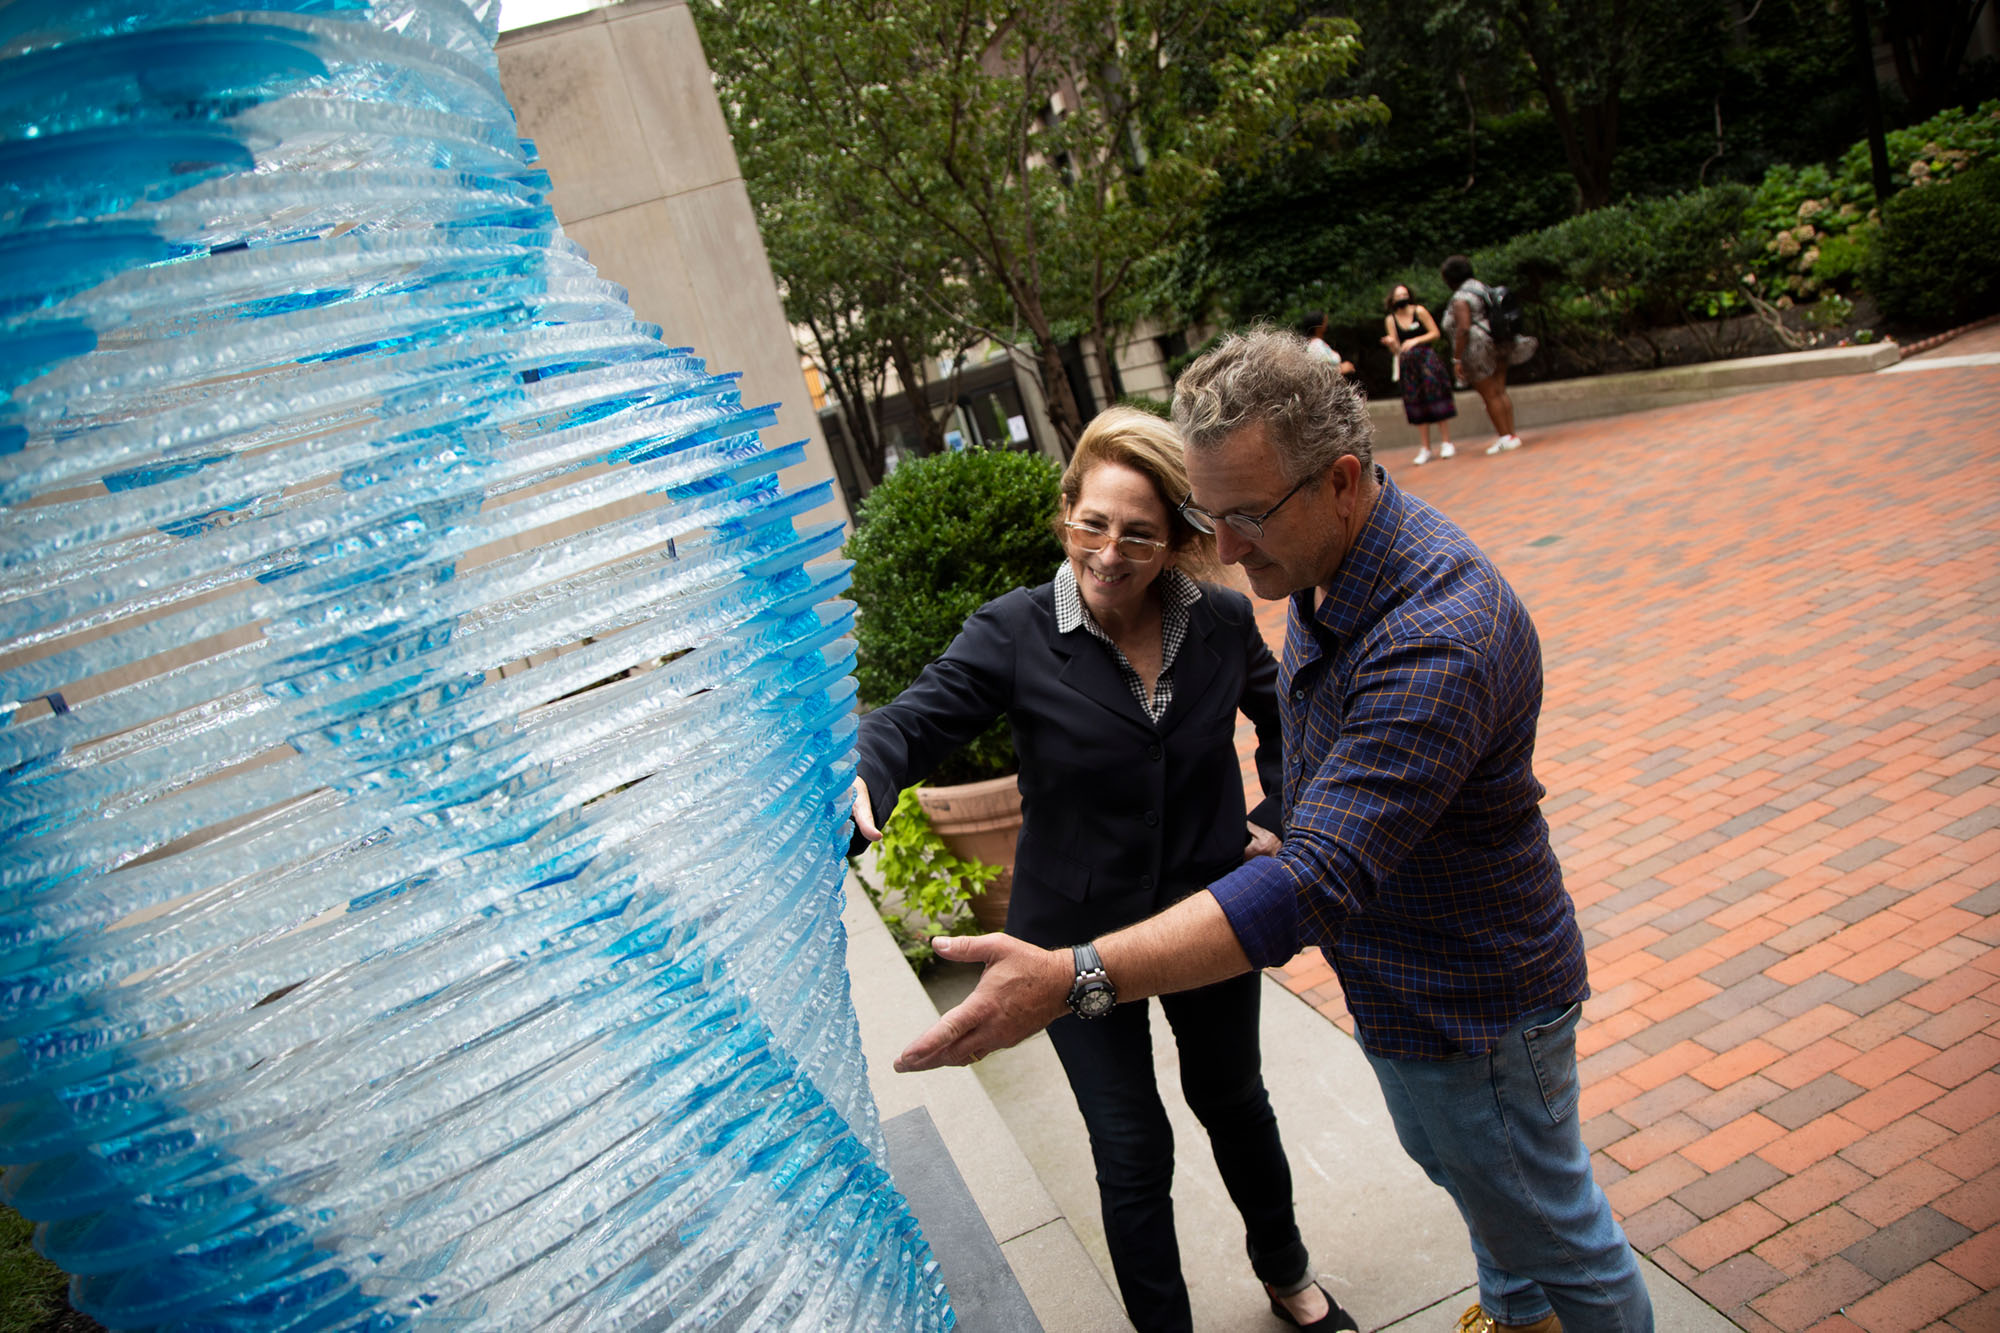 Joan Snitzer and Henry Richardson discussing the sculpture